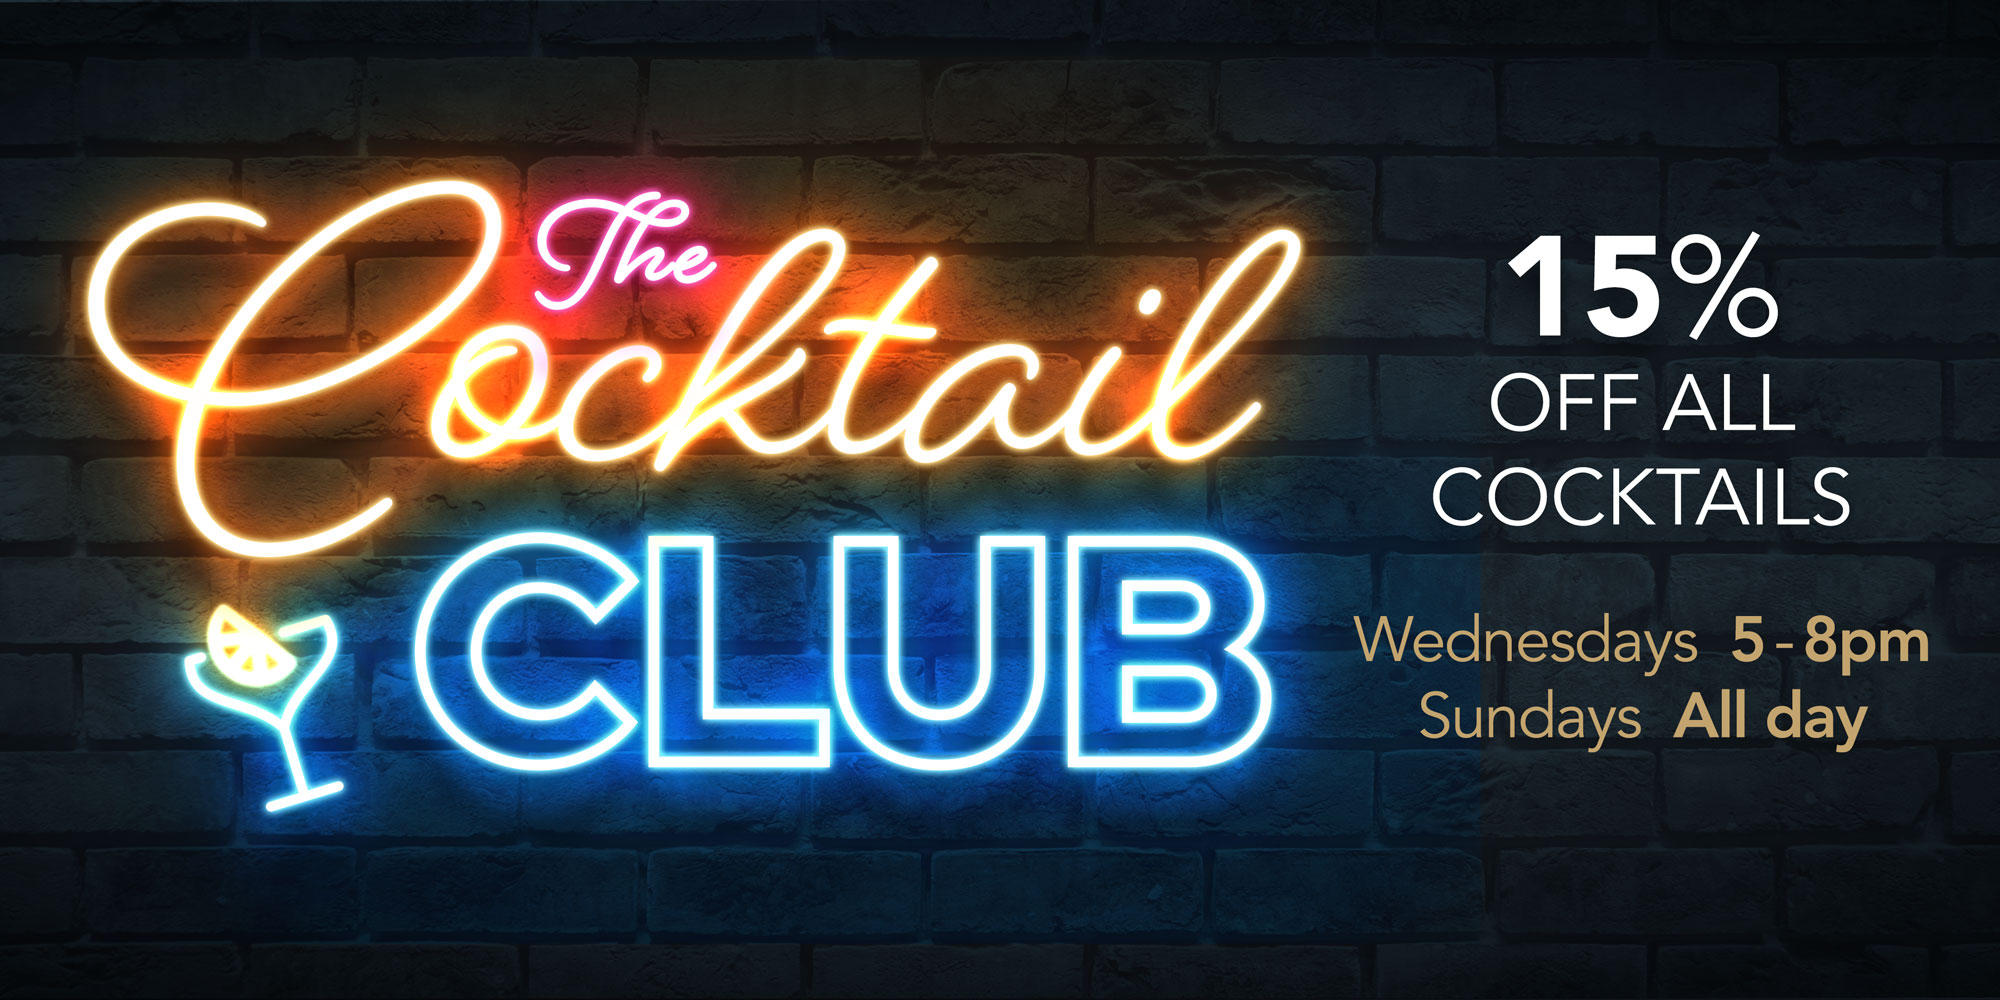 The Cocktail Club